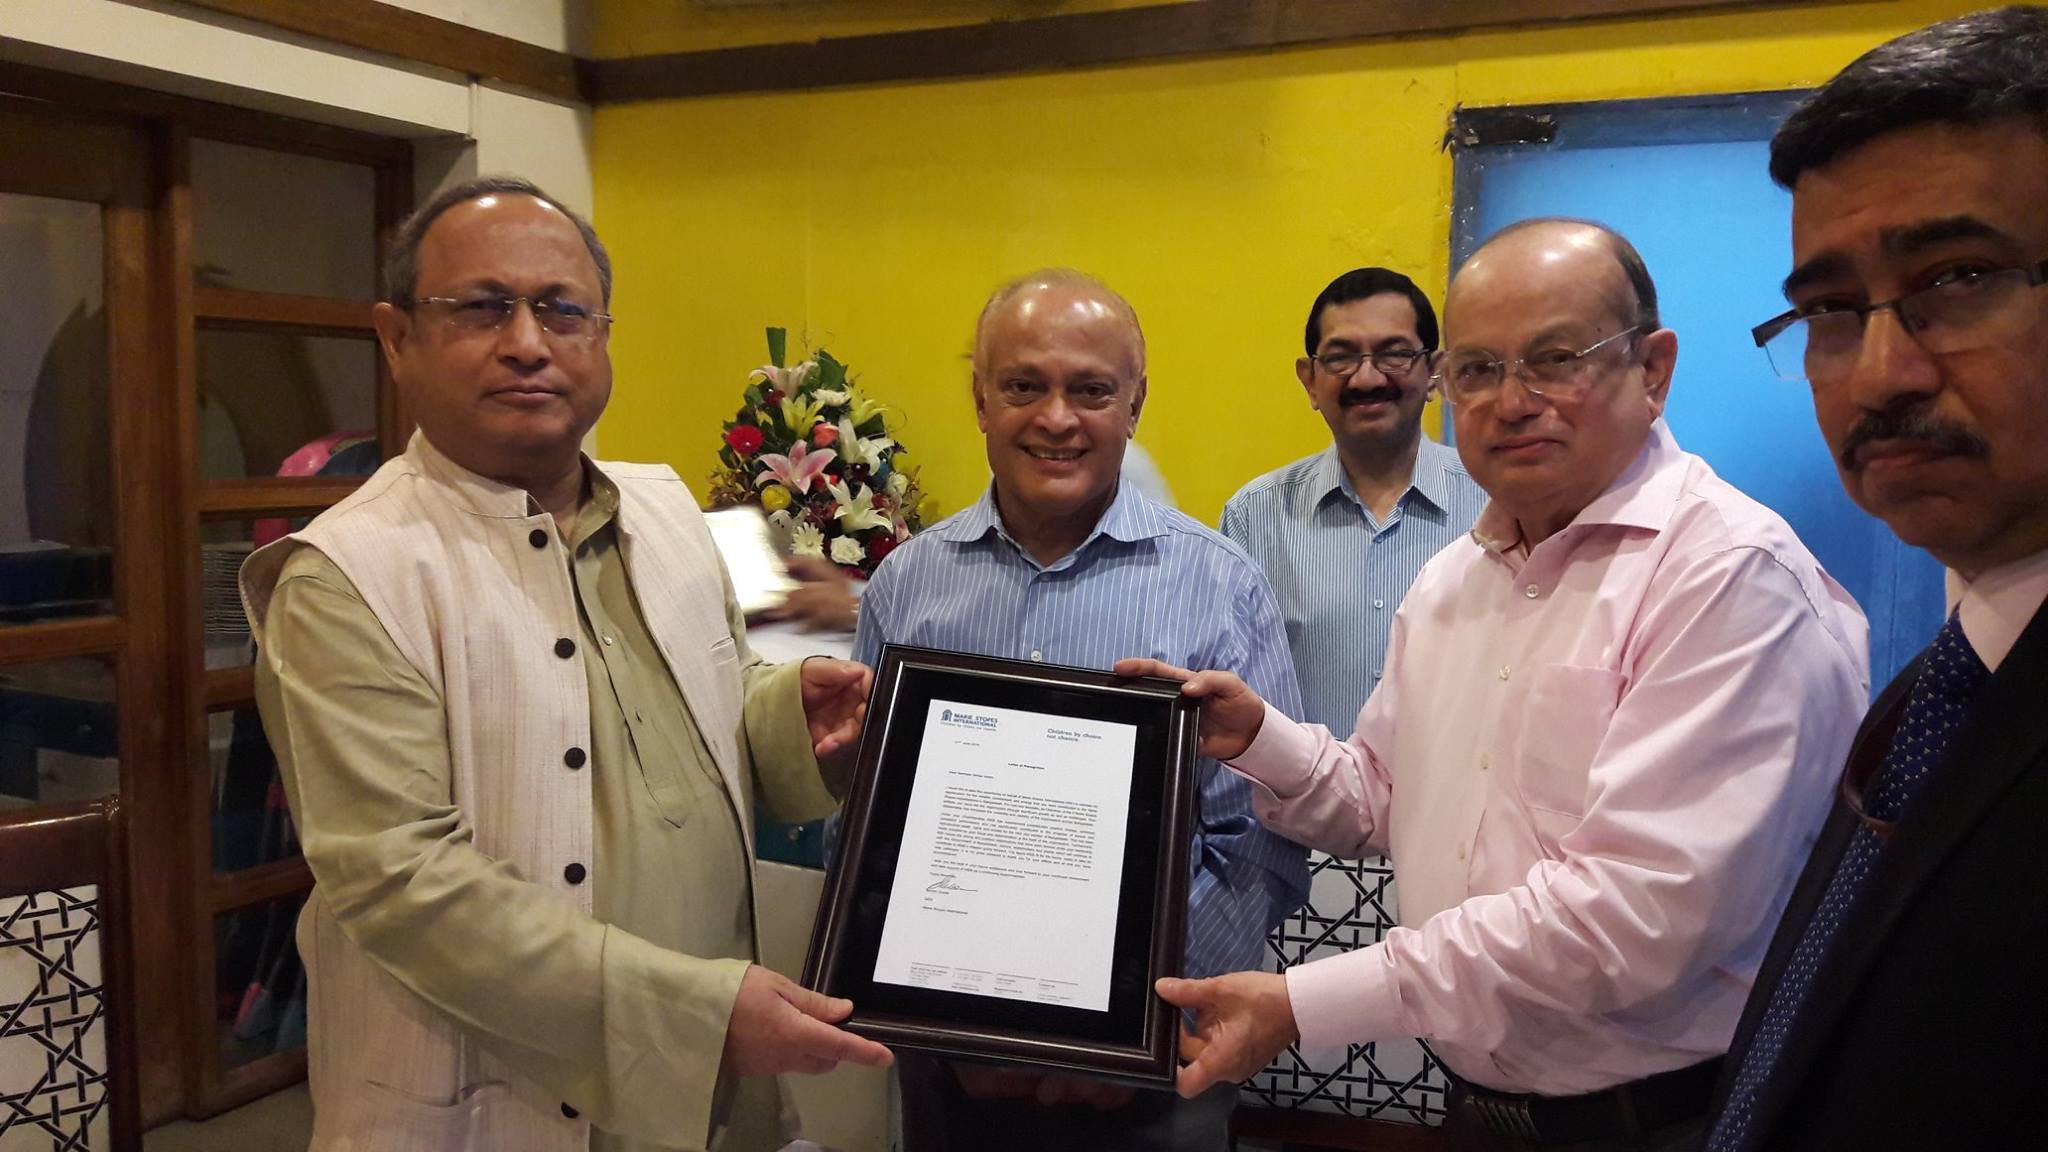 Retirement of Barrister Akhtar Imam as Chairman of Marie Stopes Bangladesh